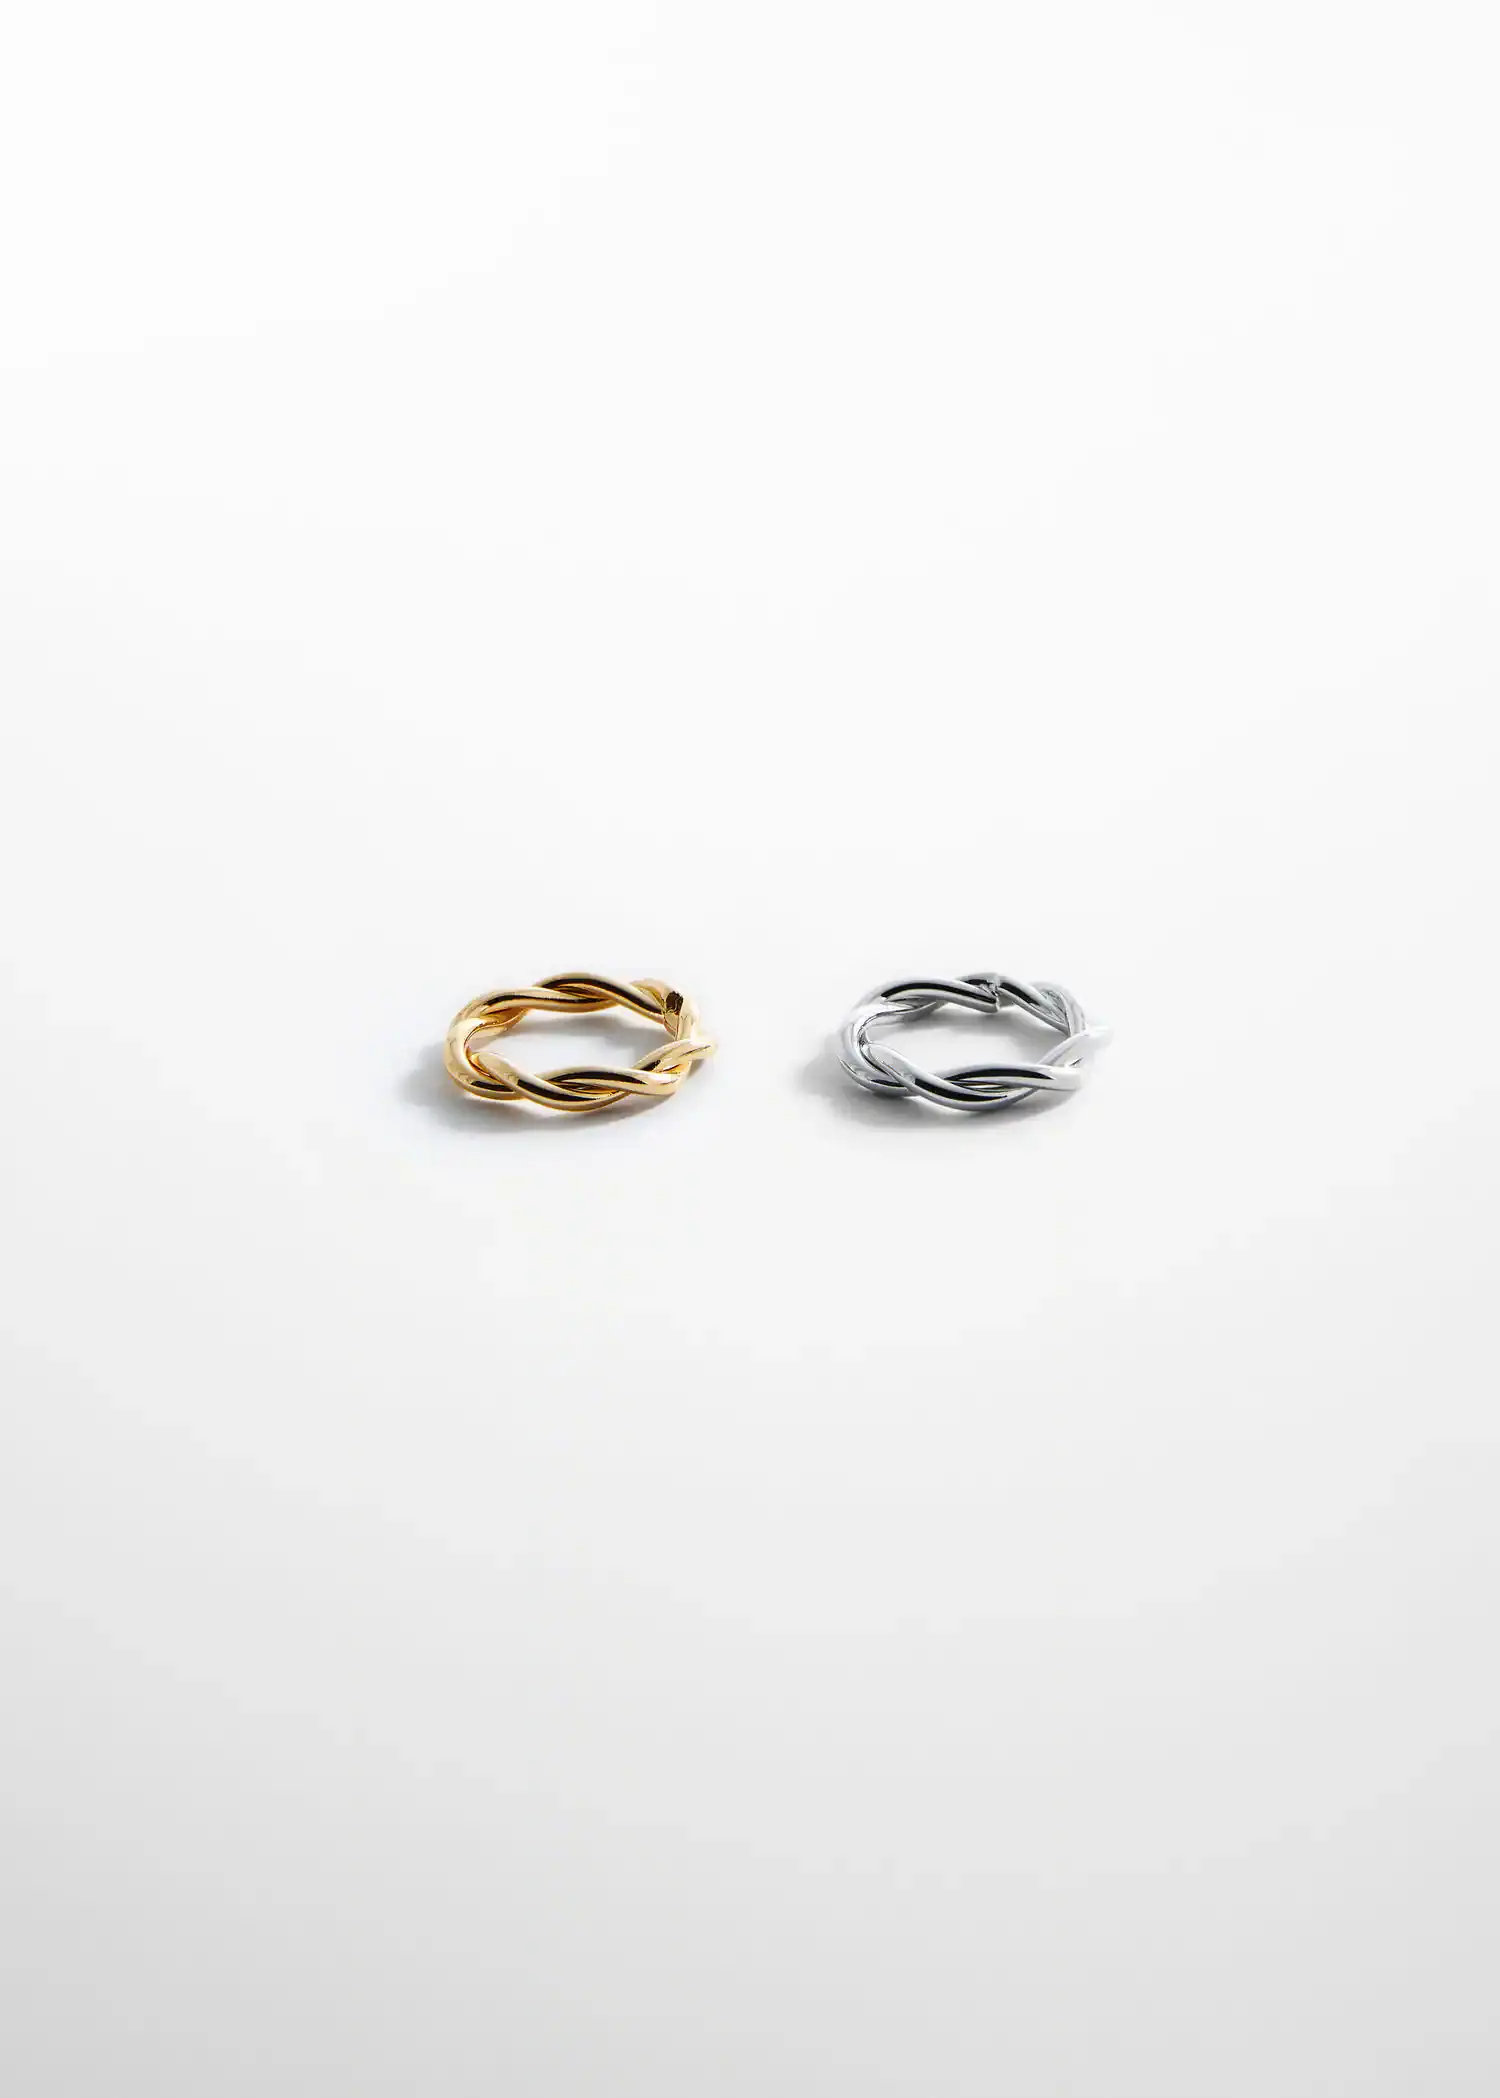 Mango Interlocking rings set. a pair of gold and silver rings on top of each other. 